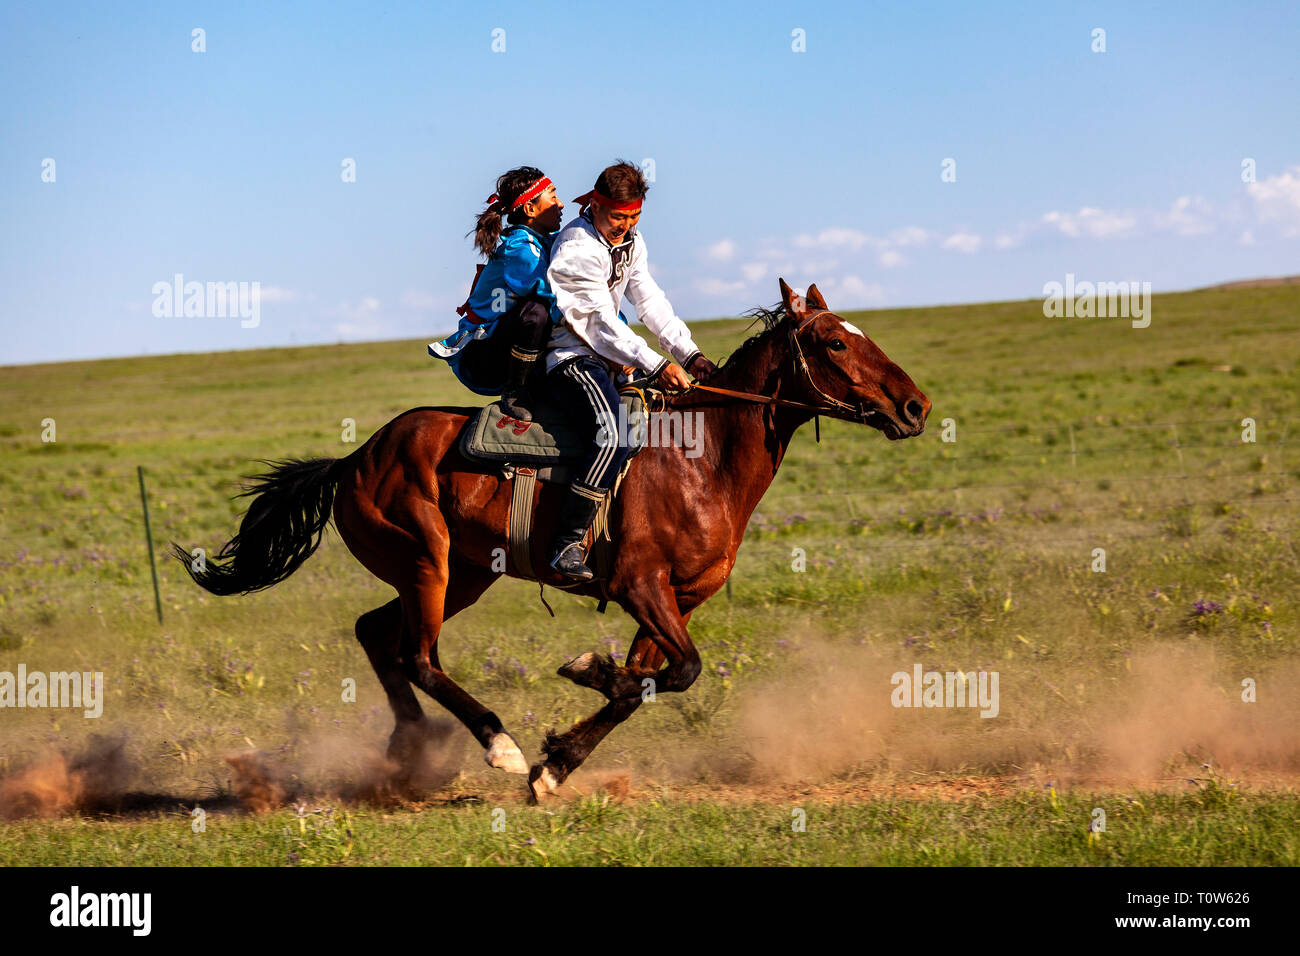 horse-and-two-riders-at-an-obo-nadam-festival-horseriding-show-at-the-gegentala-grasslands-north-of-hohhot-in-inner-mongolia-china-T0W626.jpg